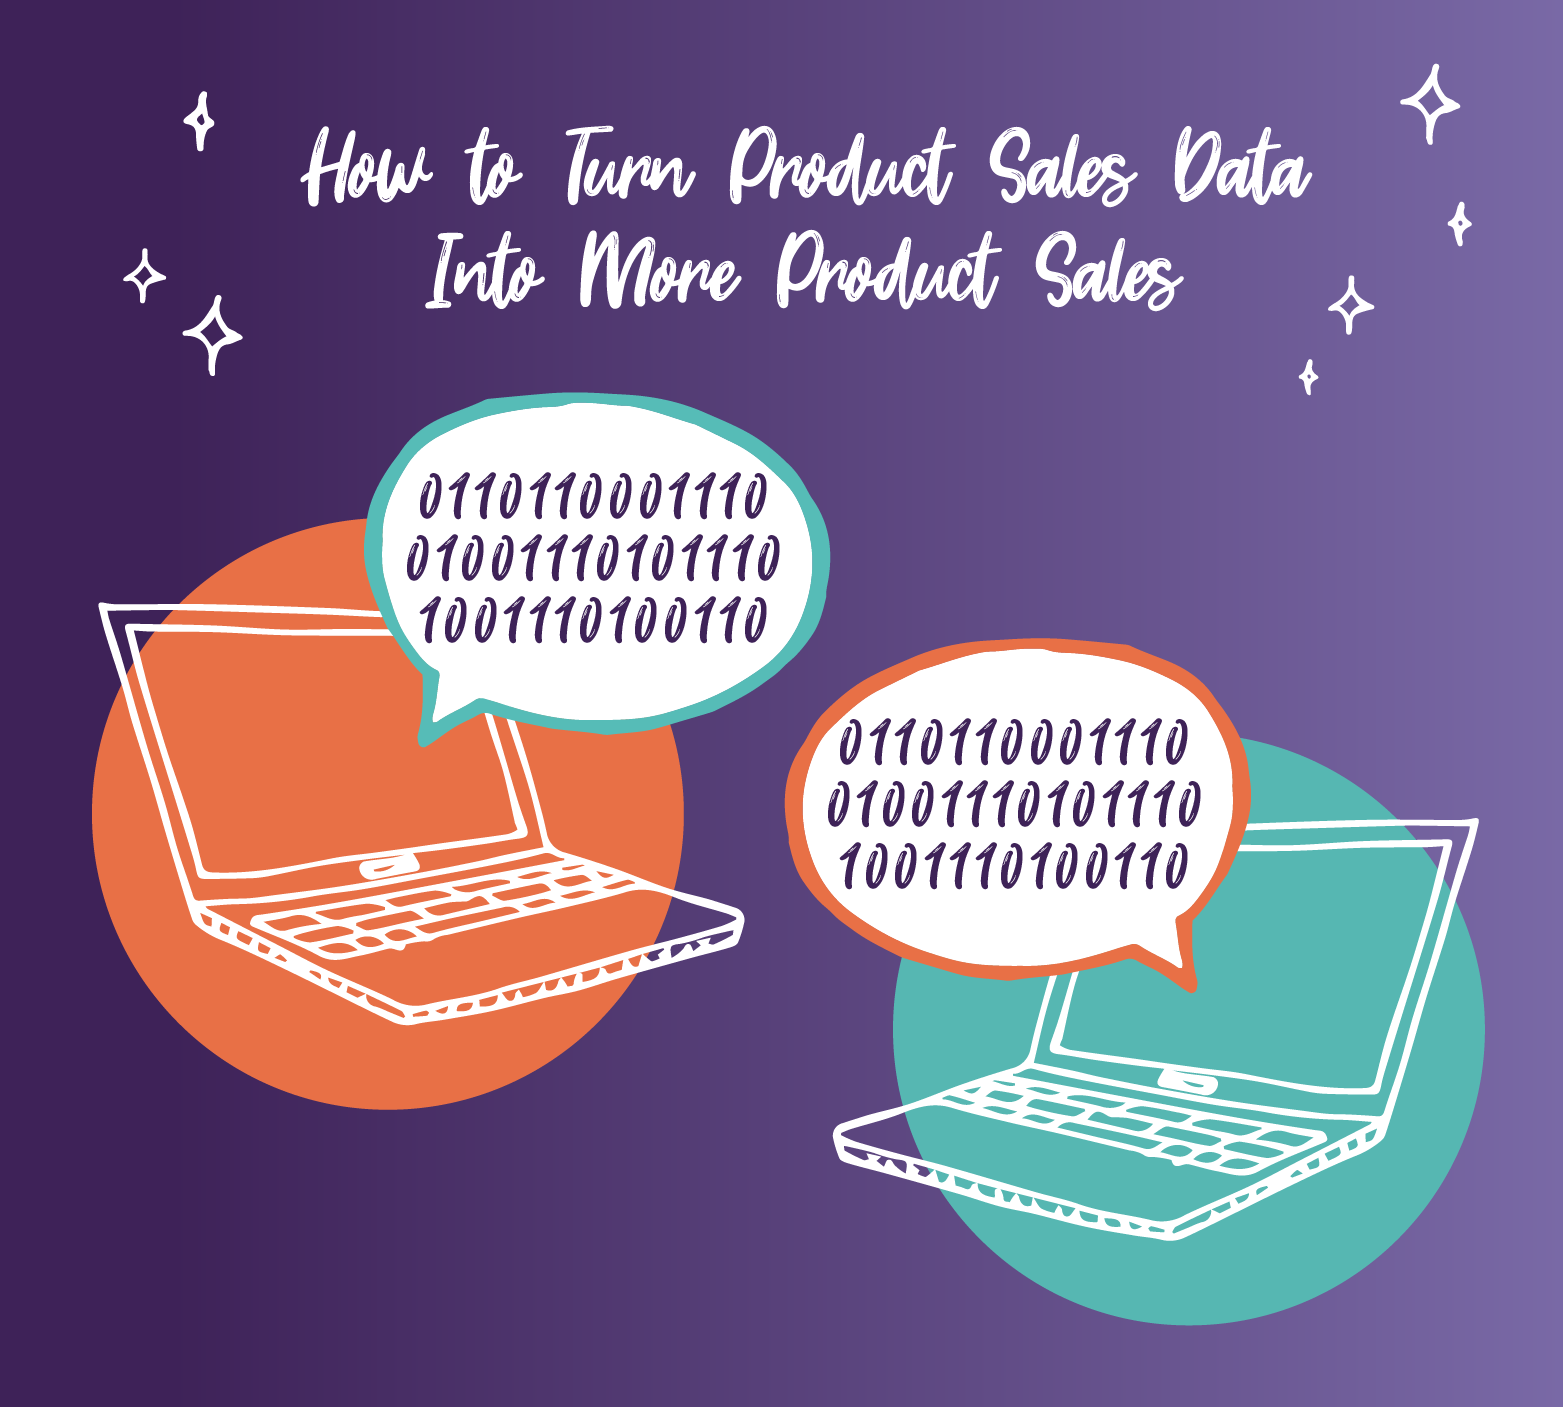 Product sales data